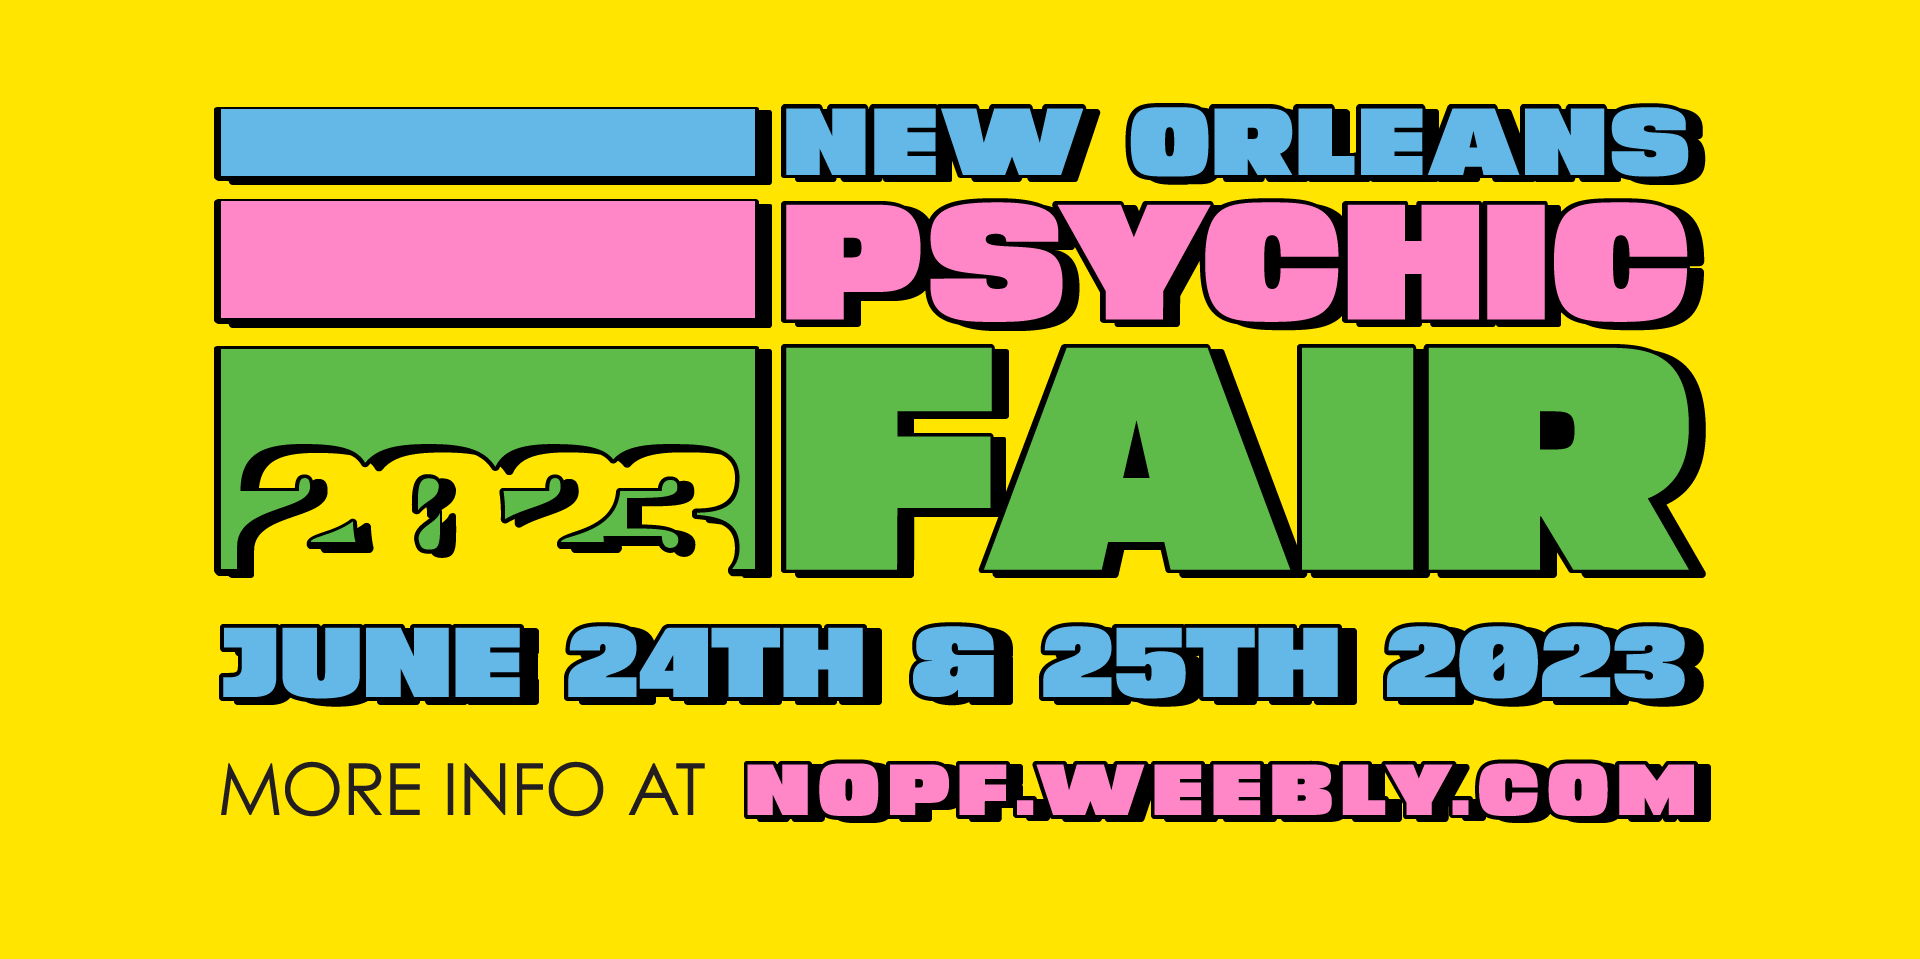 New Orleans Psychic Fair promotional image